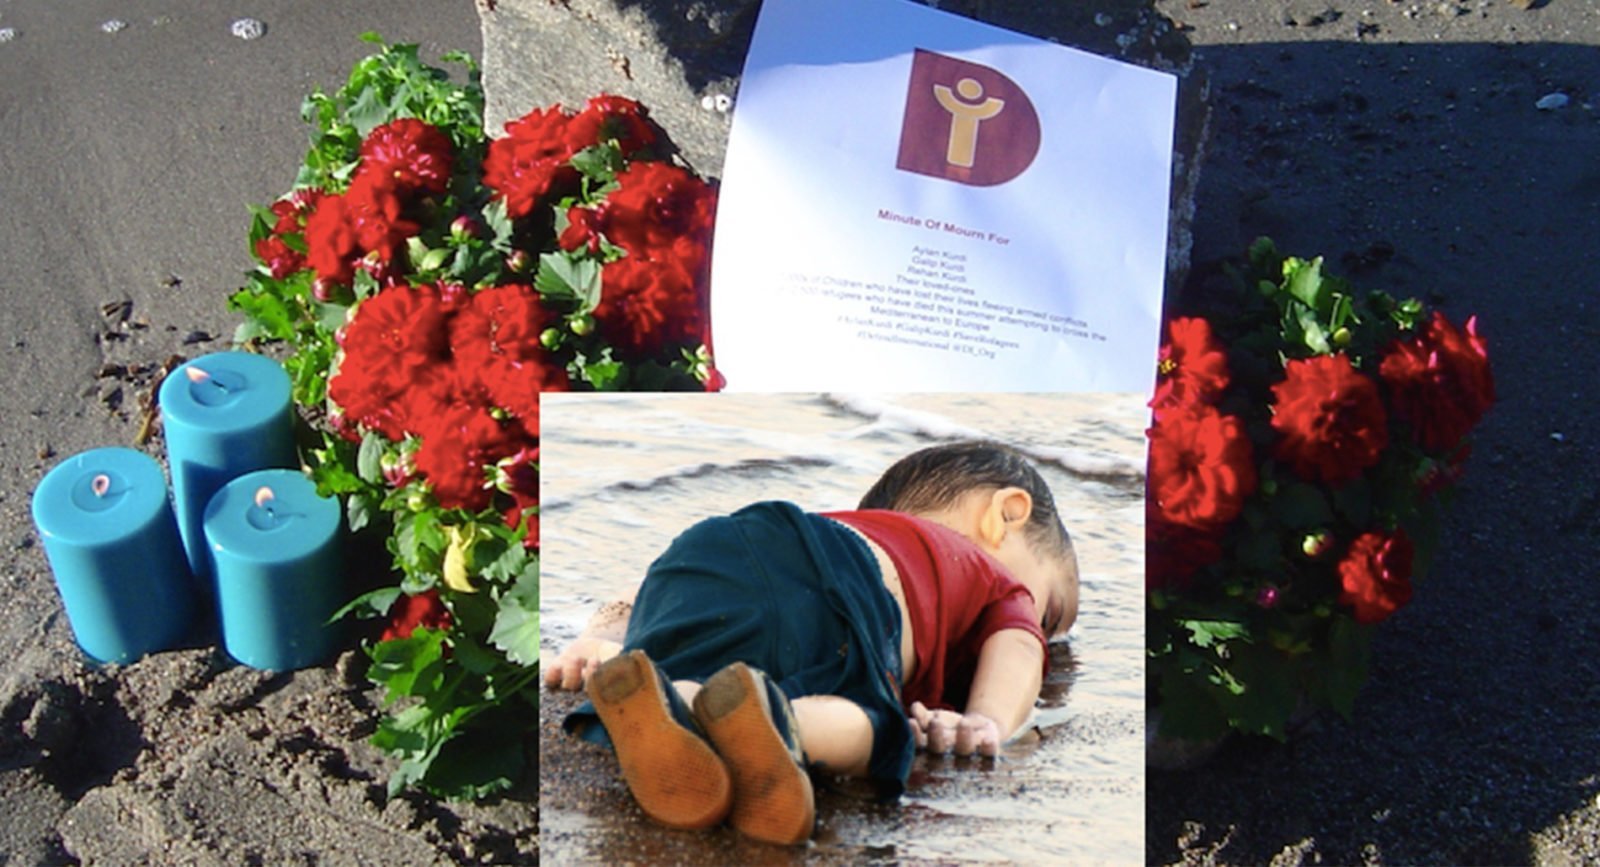 A memorial of flowers and a note at the site where Syrian refugee Alan Kurdi drowned.